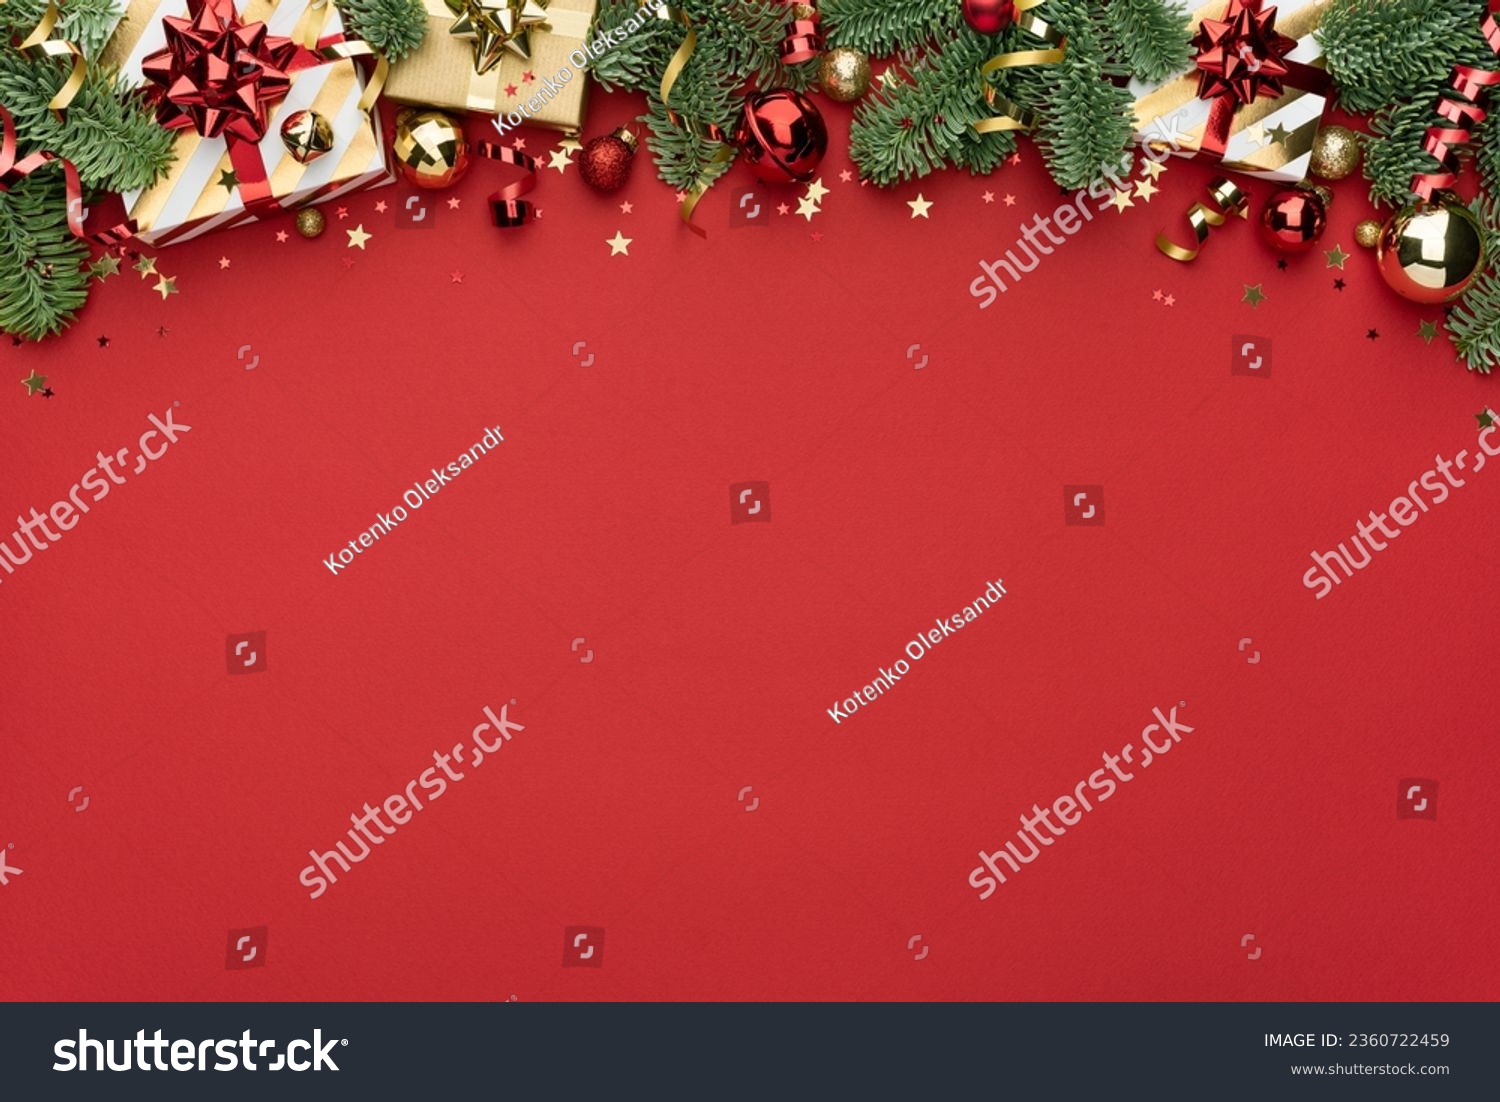 Red Christmas or New Year Ornament Border Background #2360722459